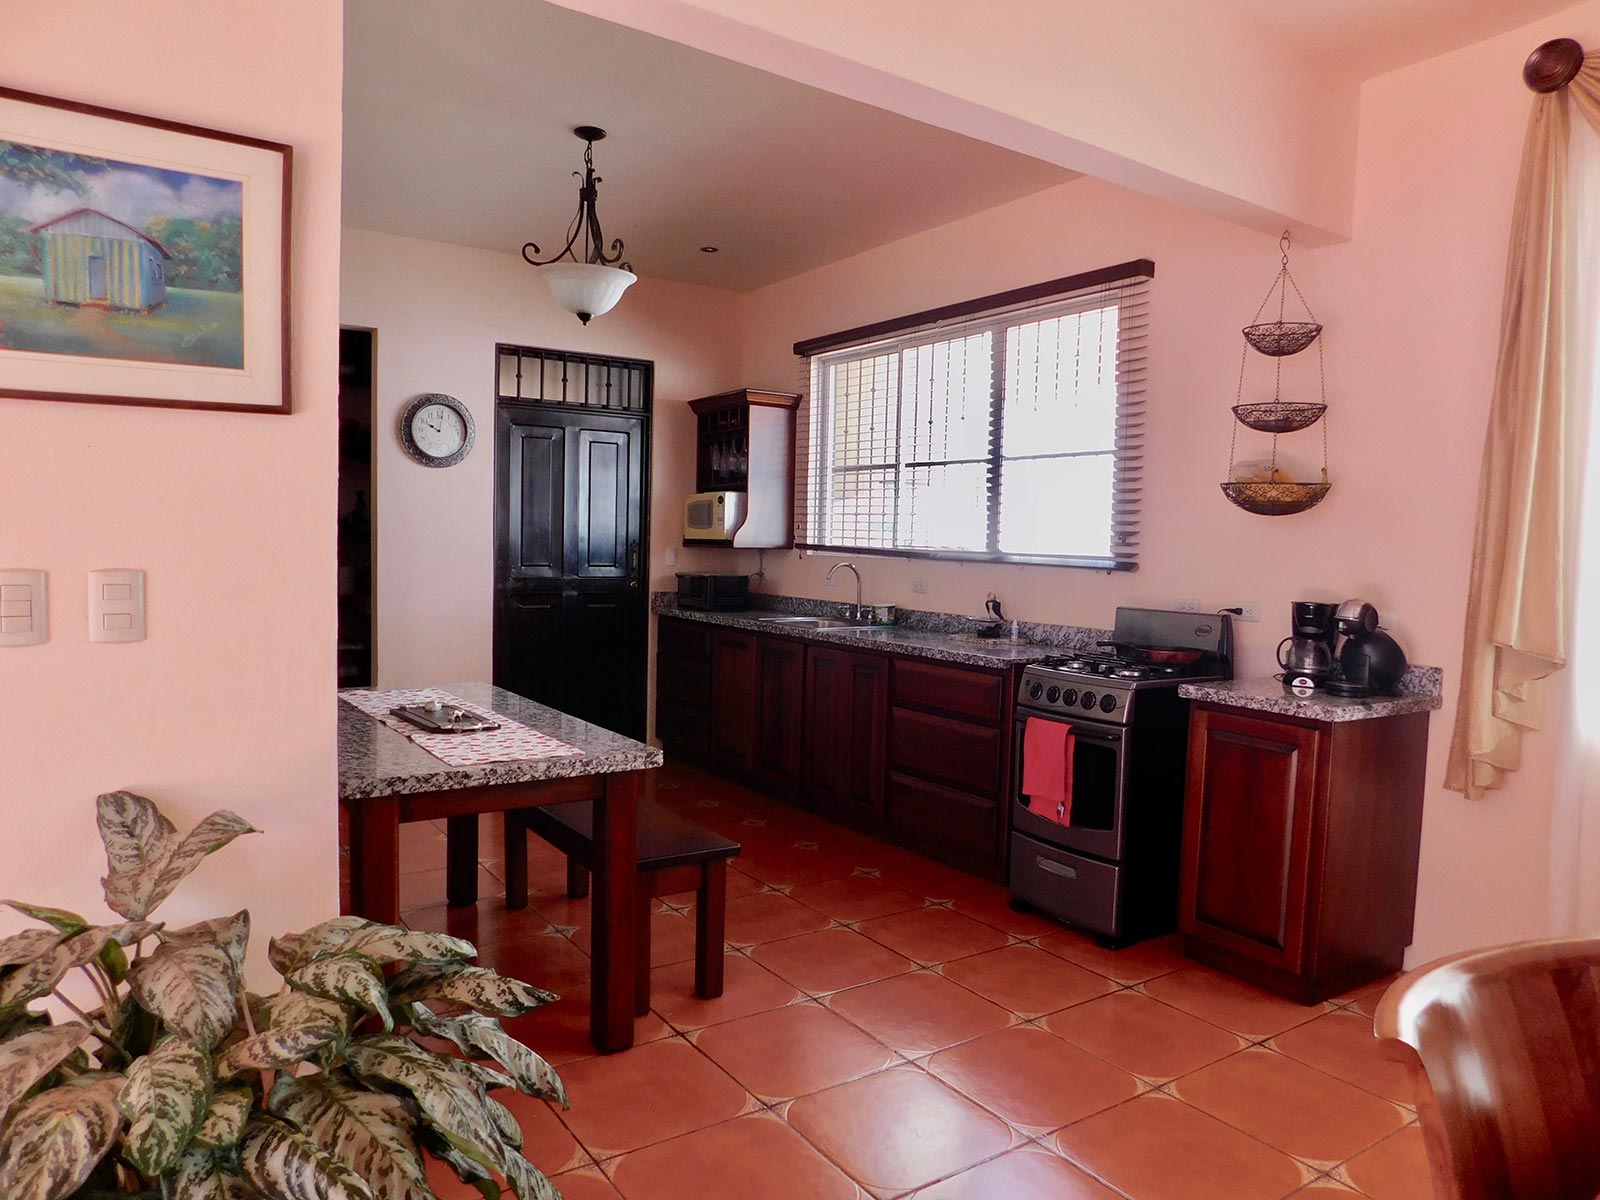 Lovely home in private tico/expat community of outdoors enthusiasts! Tennis courts, swimming pools, hiking trails - all maintained for you in the private, gated and secure community.